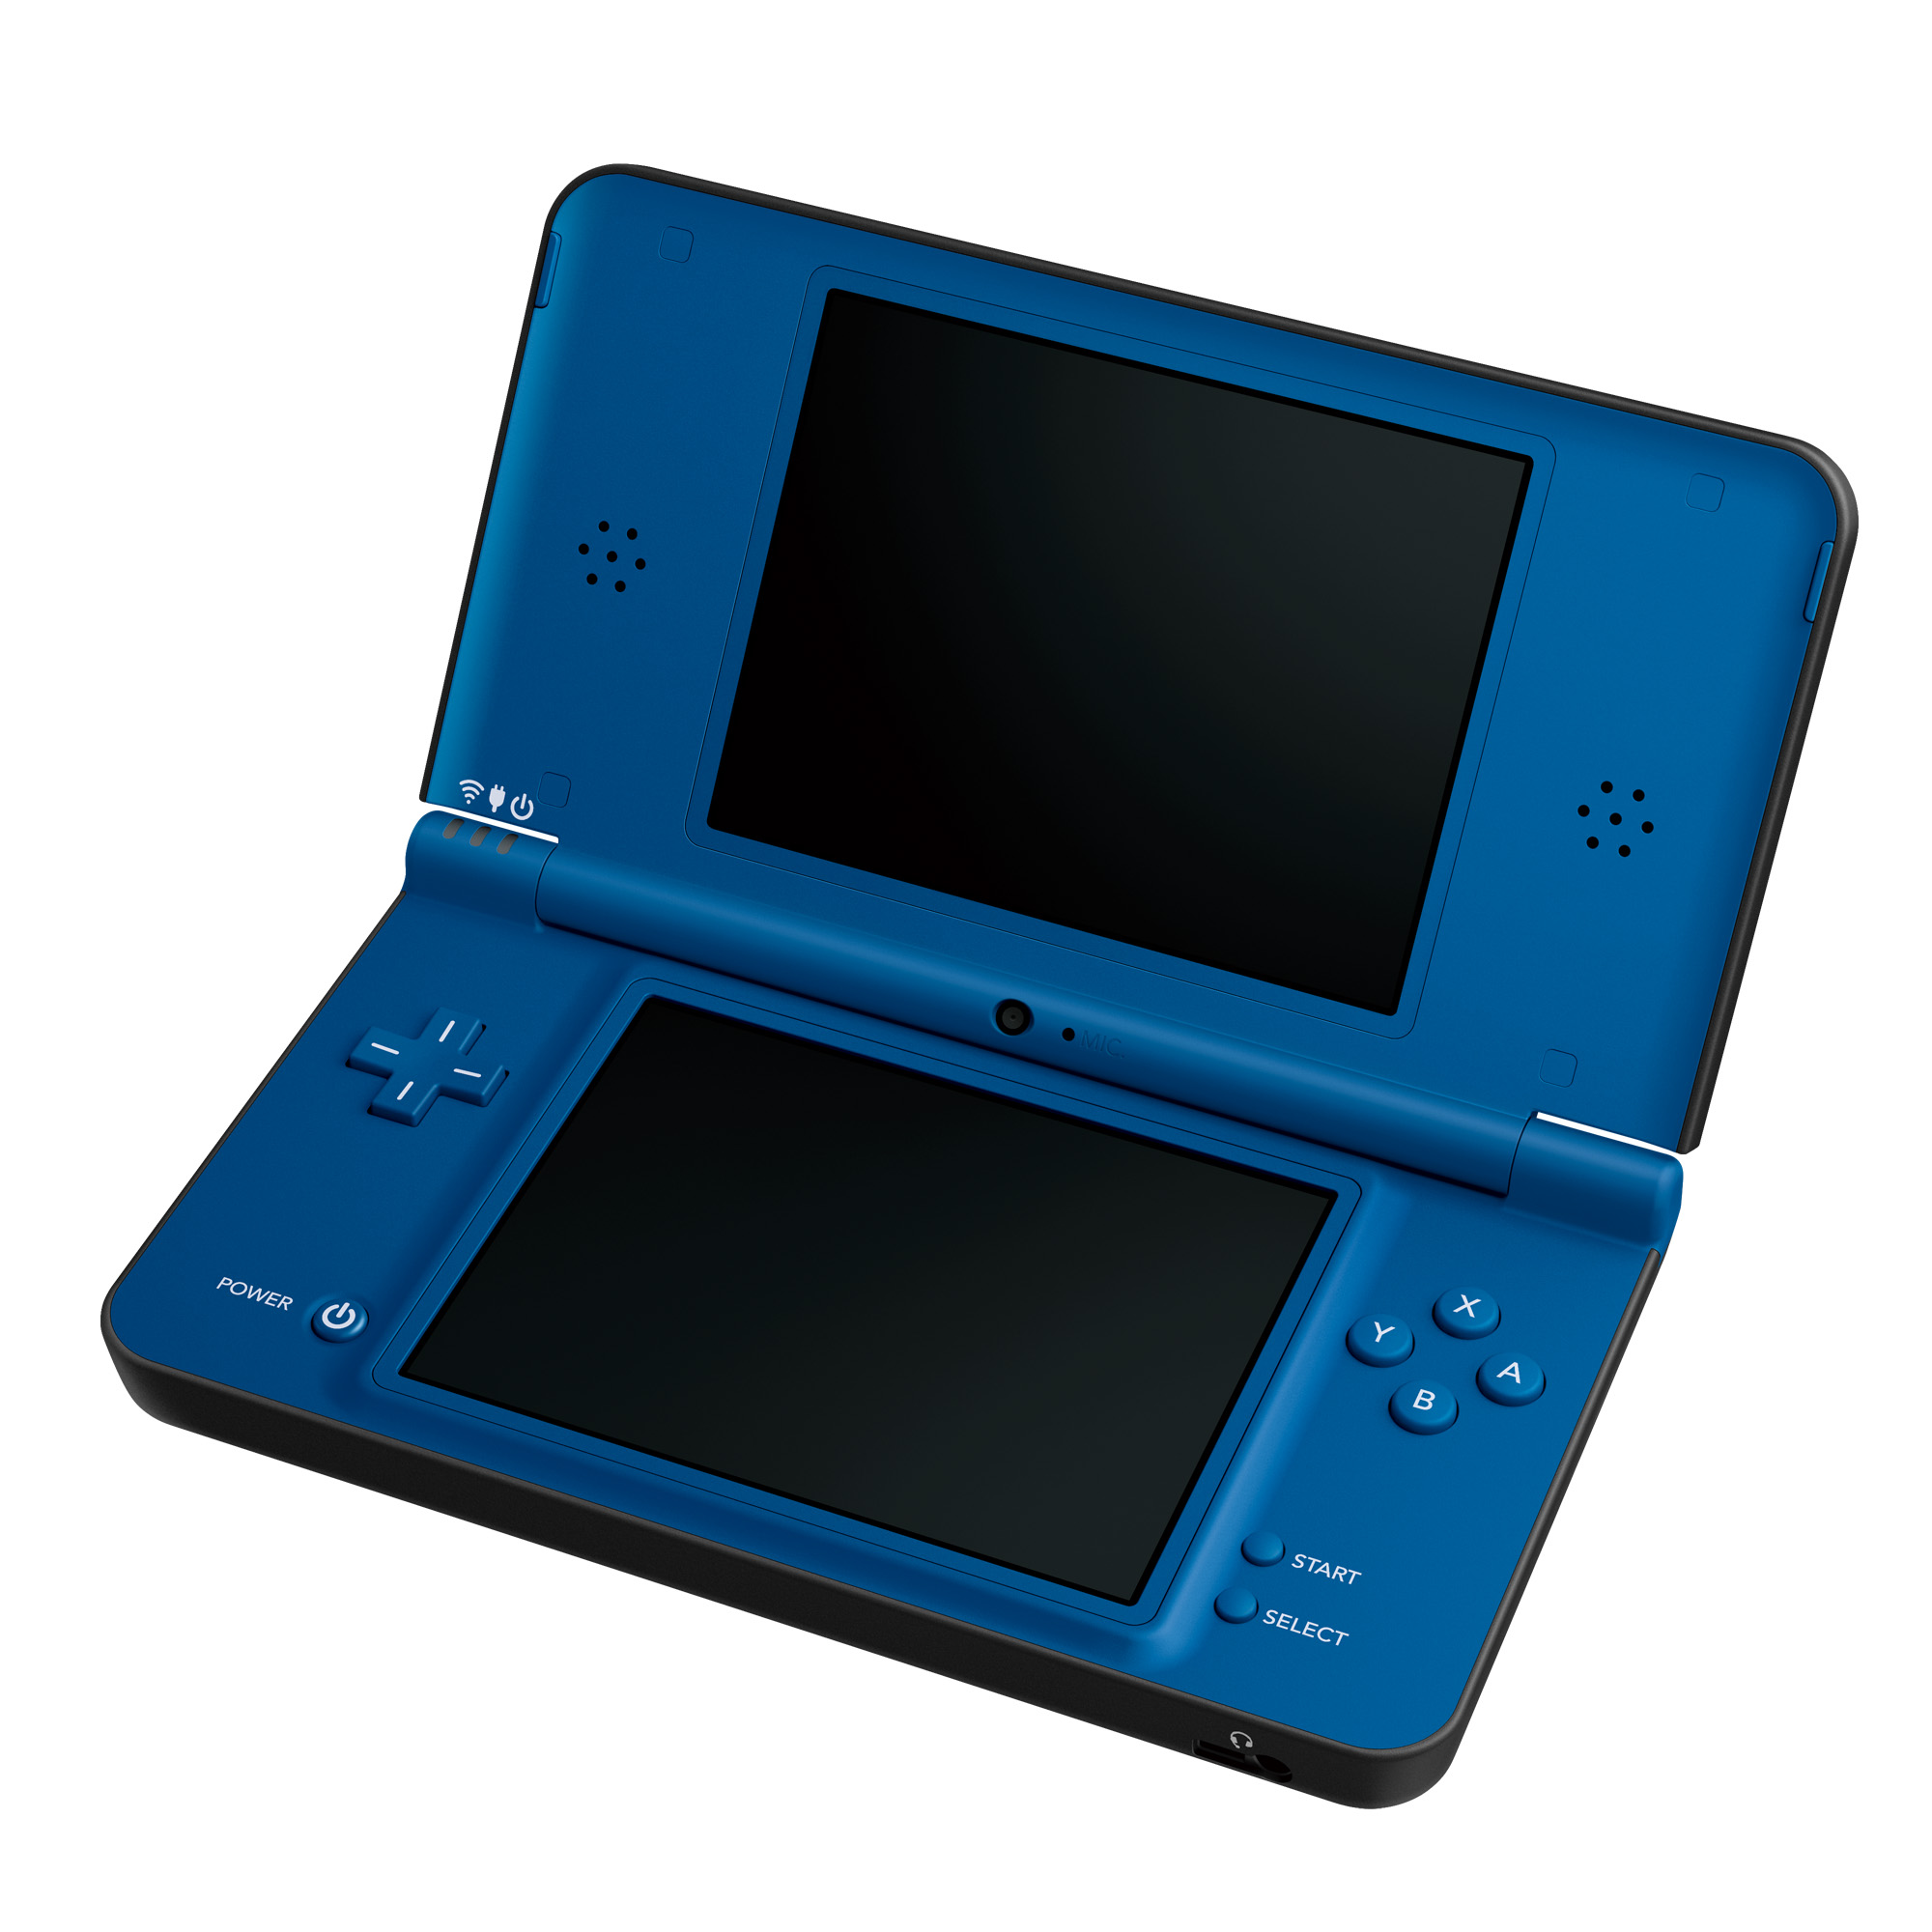 Midnight Blue DSi XL pictures - Nintendo Everything.